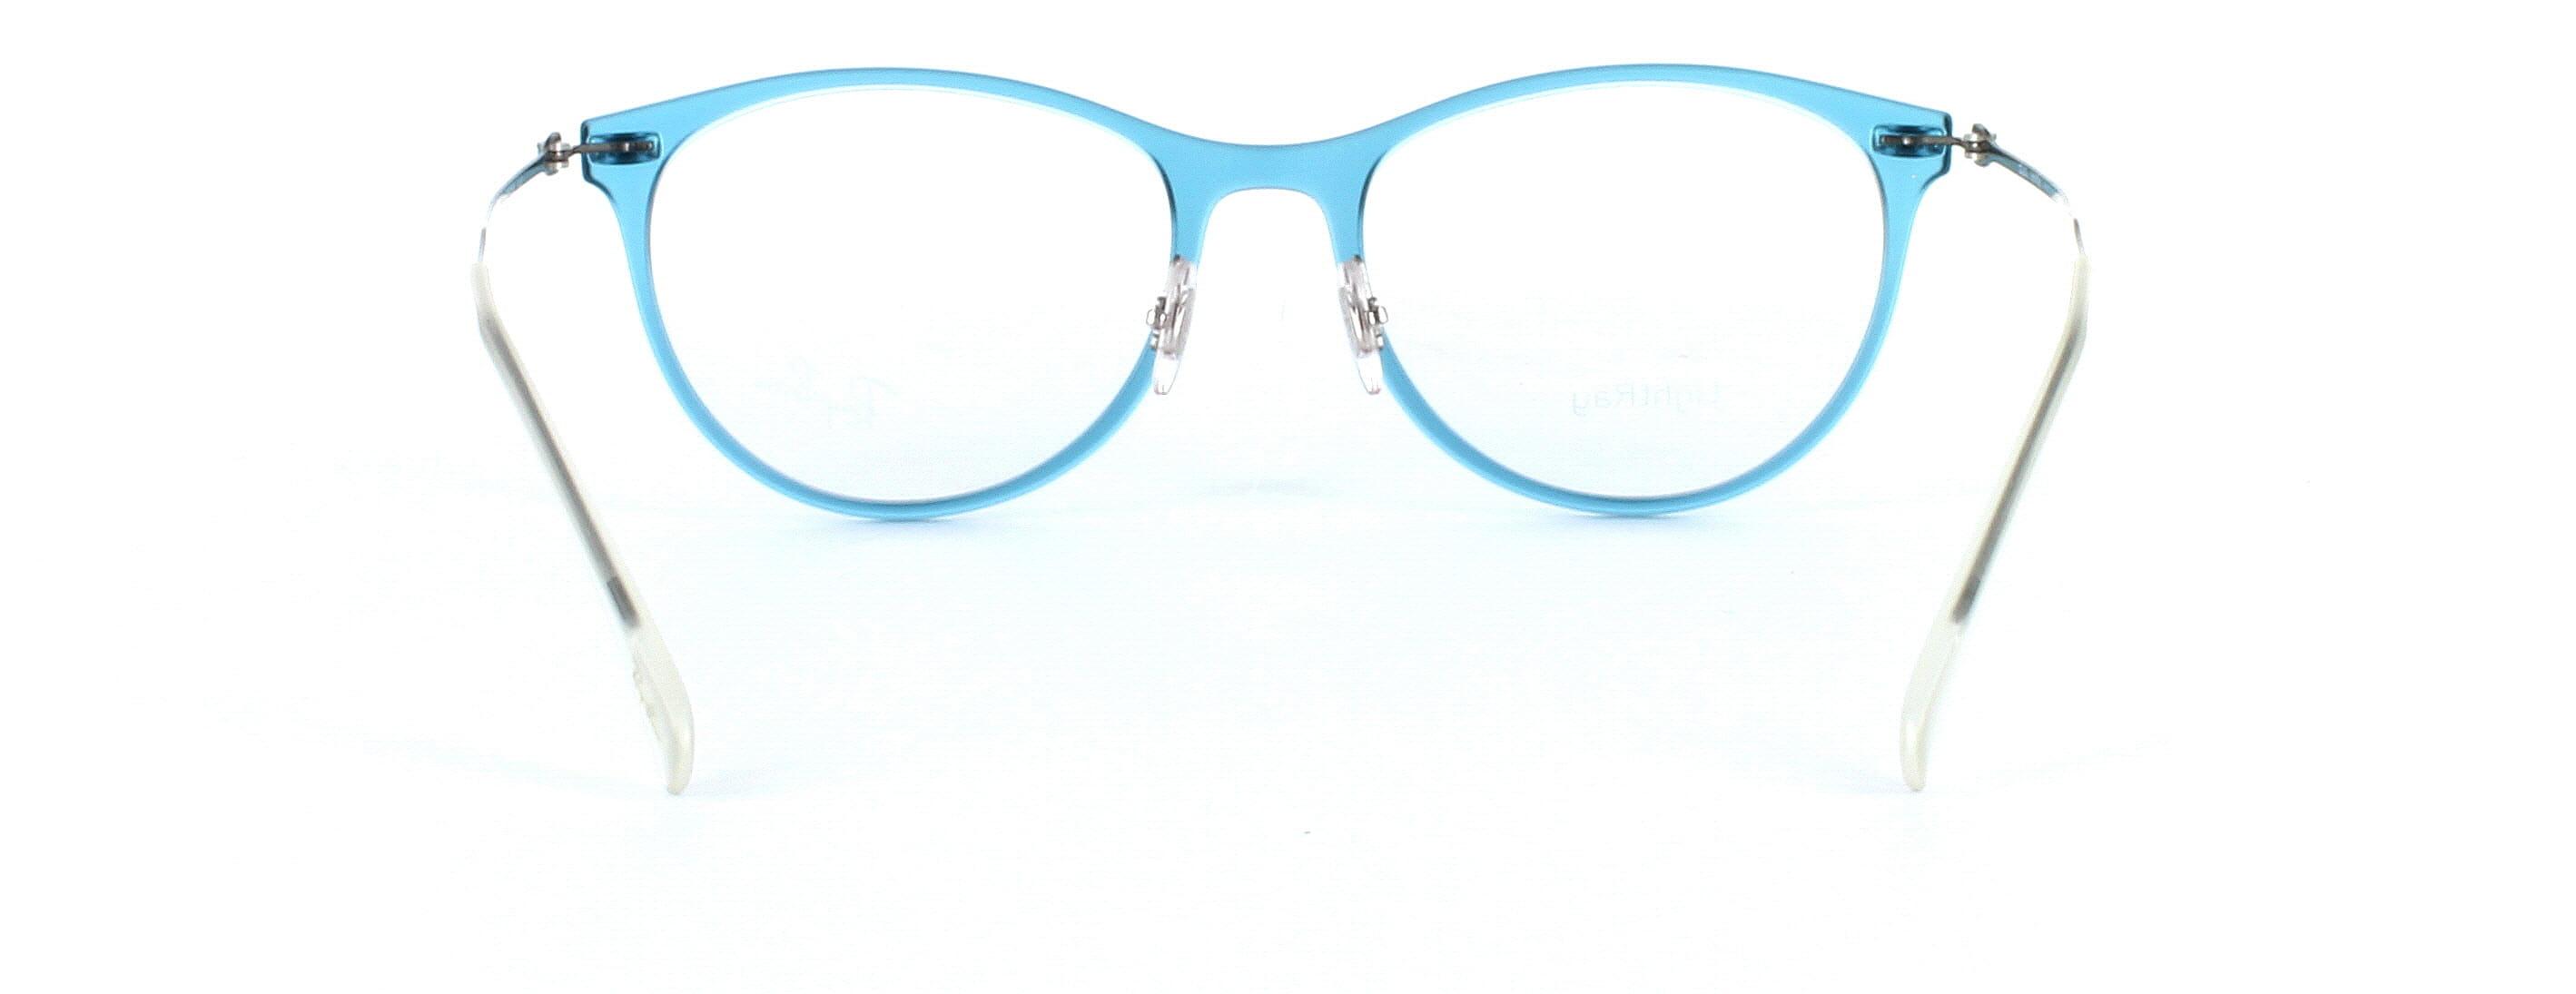 ray Ban 7160 - ladies acetate frame in blue - image view 3